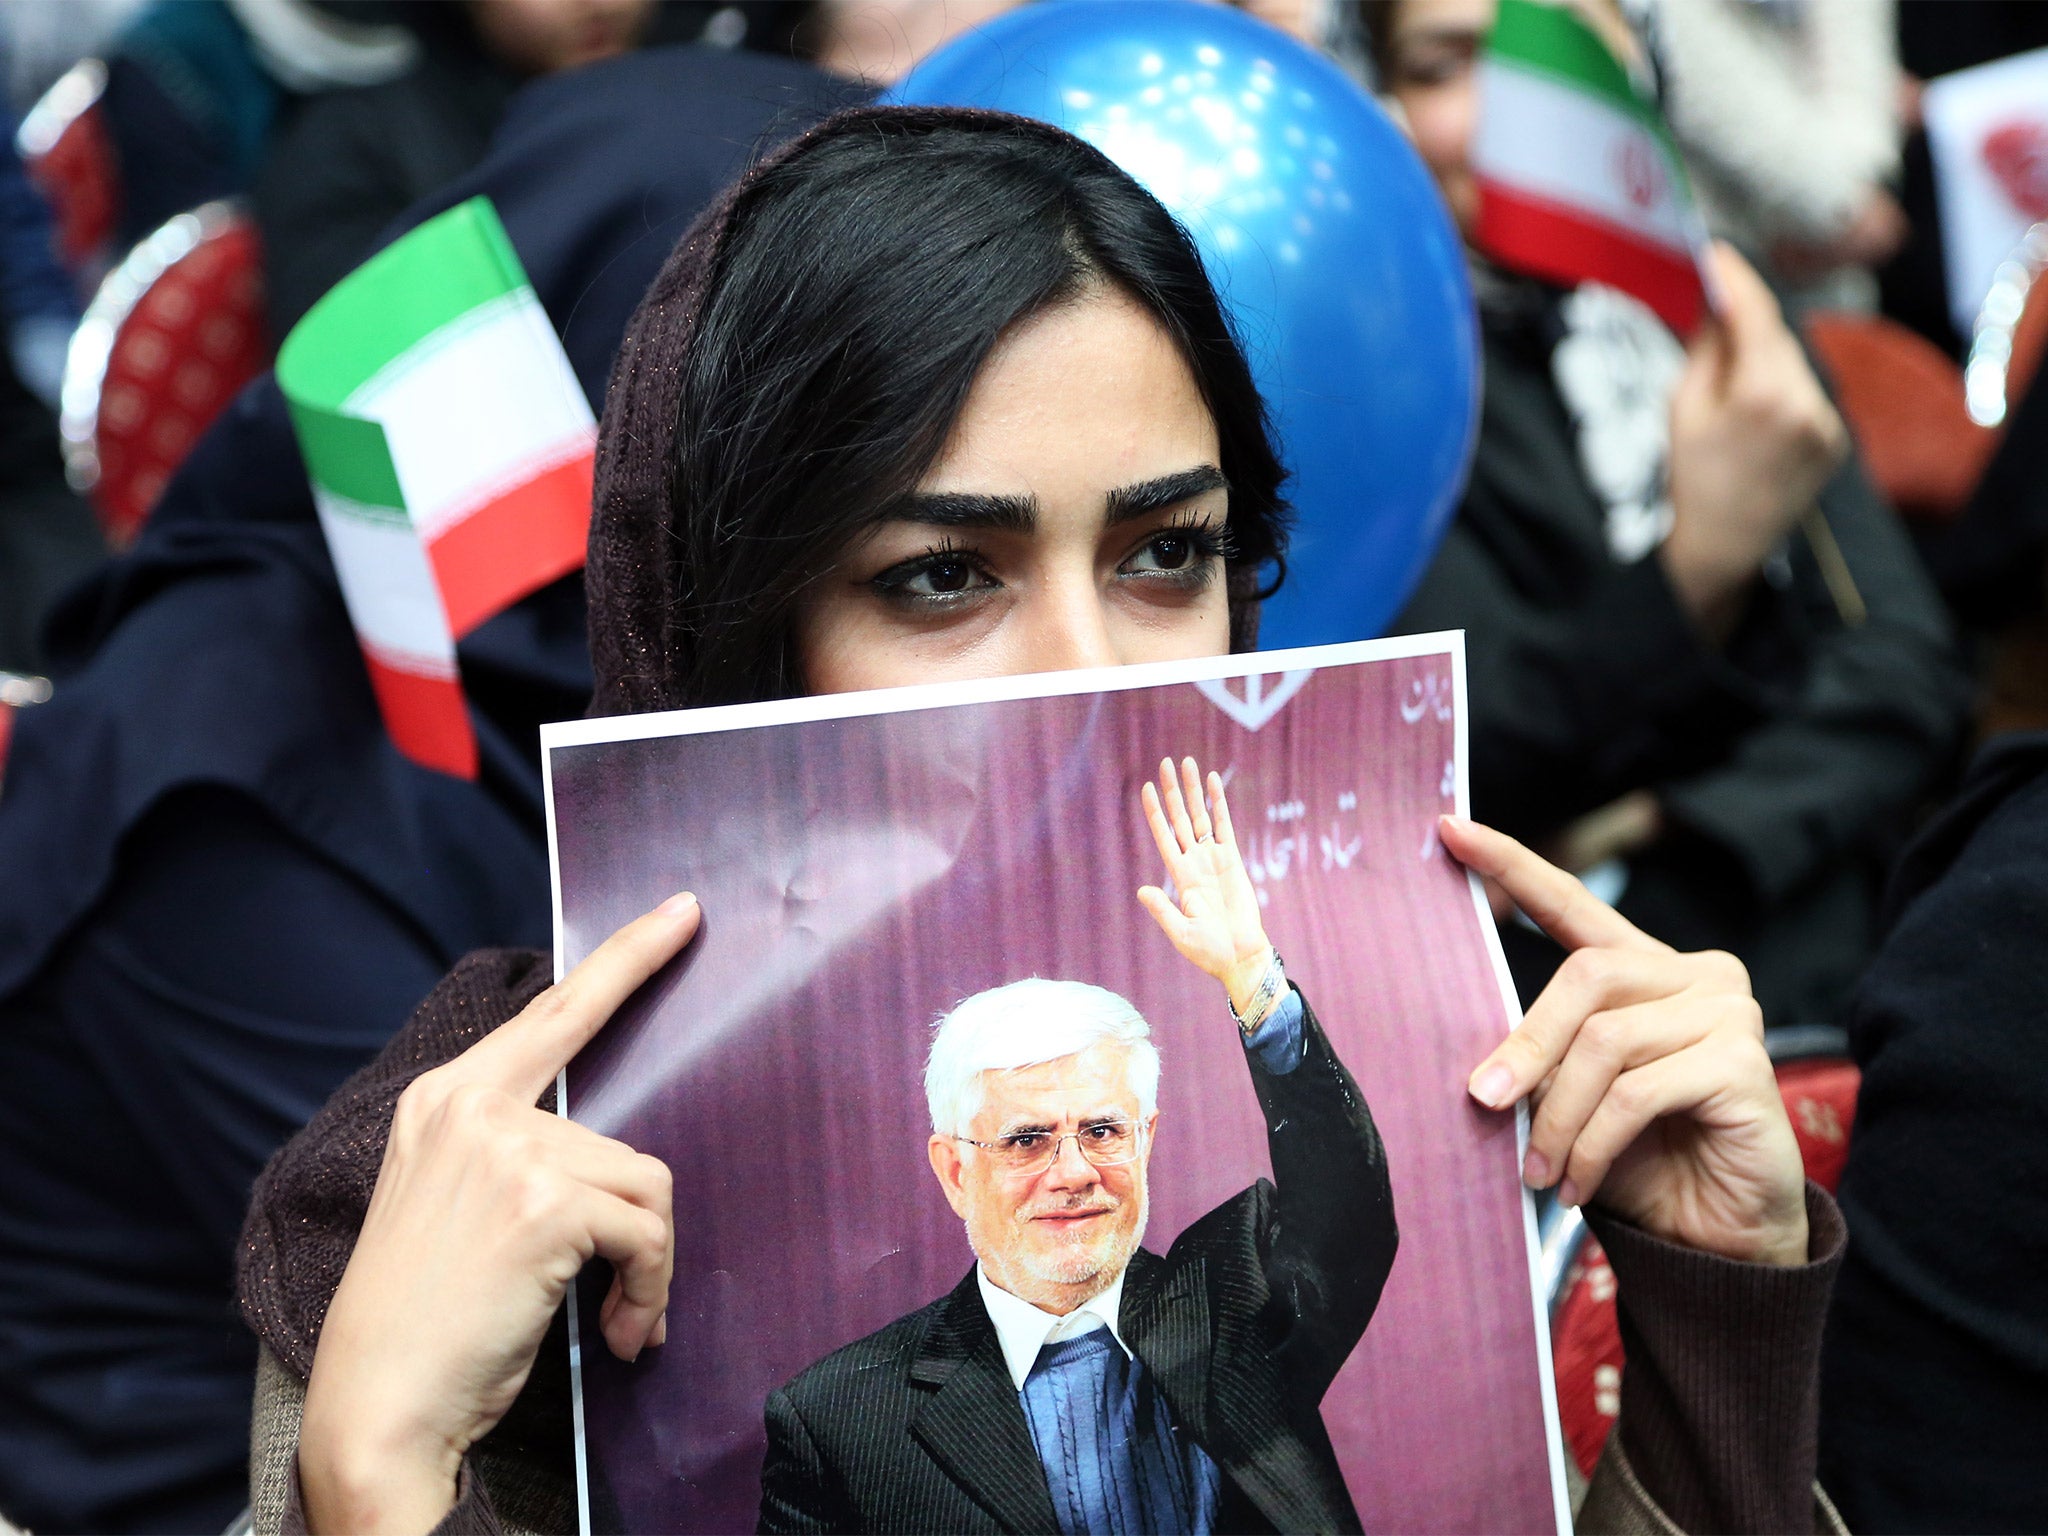 An Iranian woman holds up a poster of Mohammad Reza Aref, a prominent reformist candidate